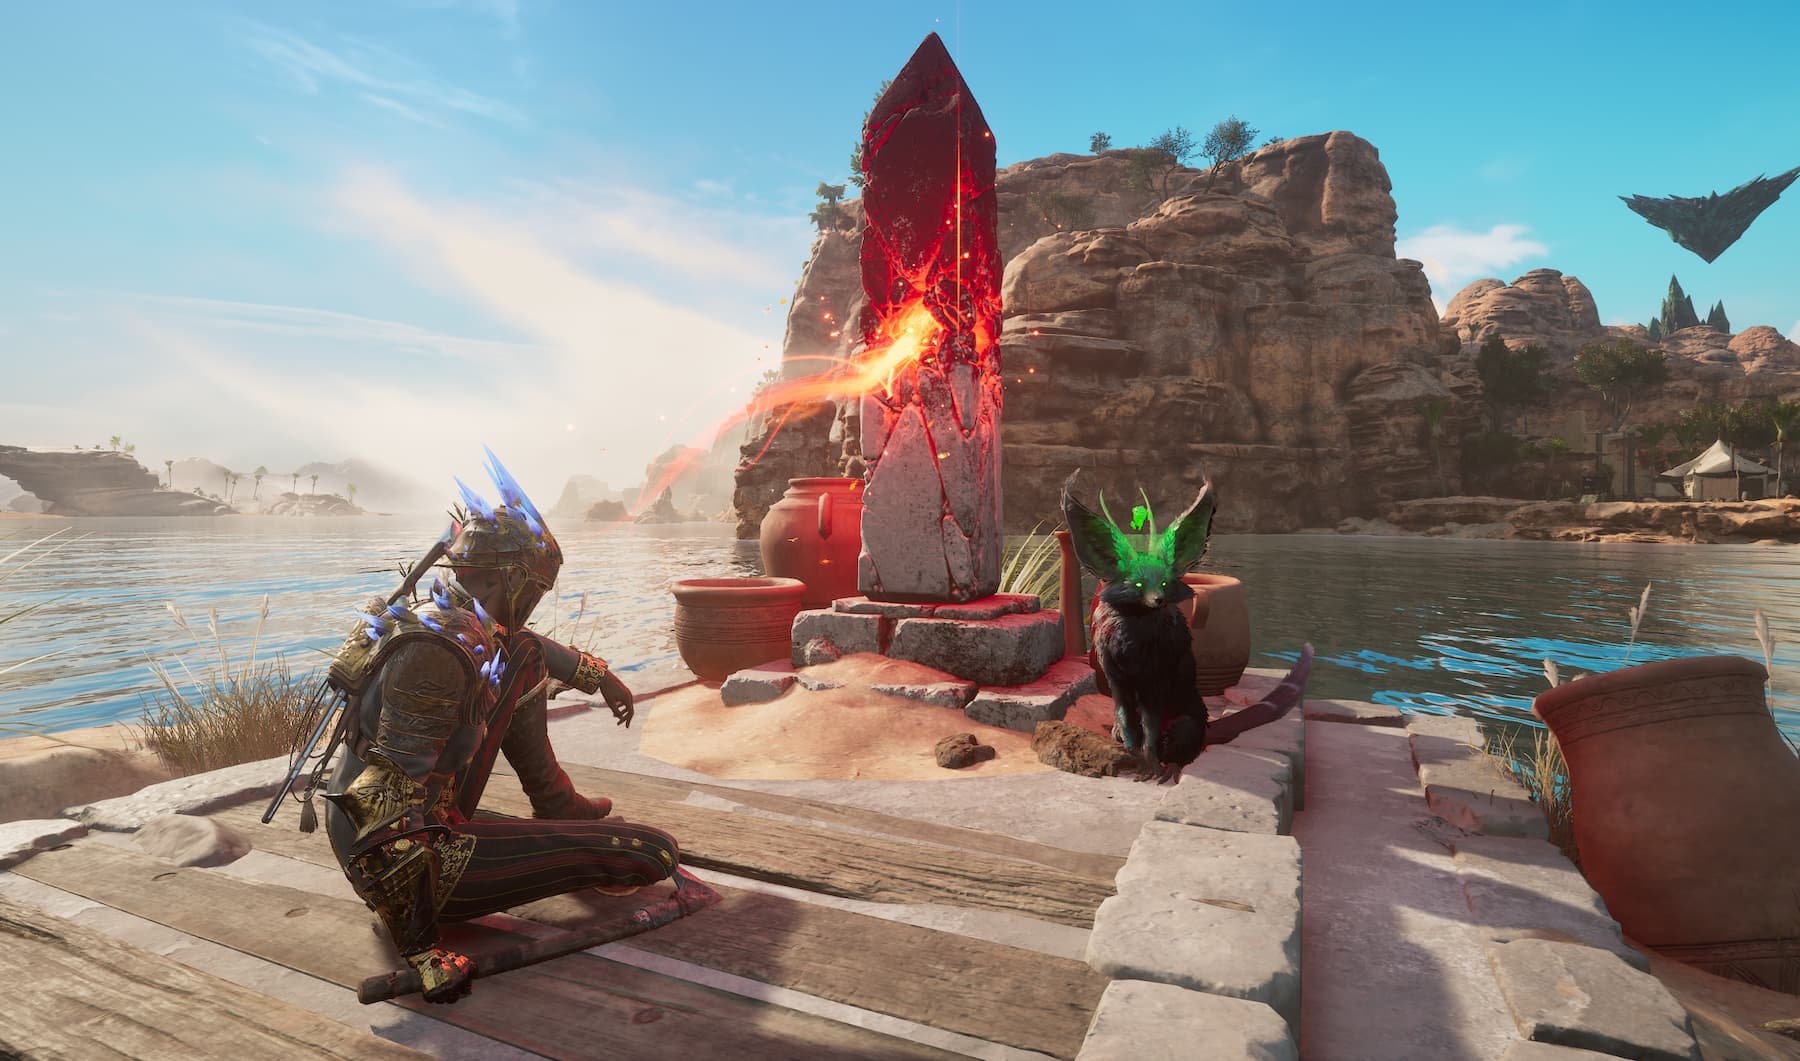 A screenshot from Flintlock showing a red and beige pillar emitting a red glow while Nor and Enki sit nearby.